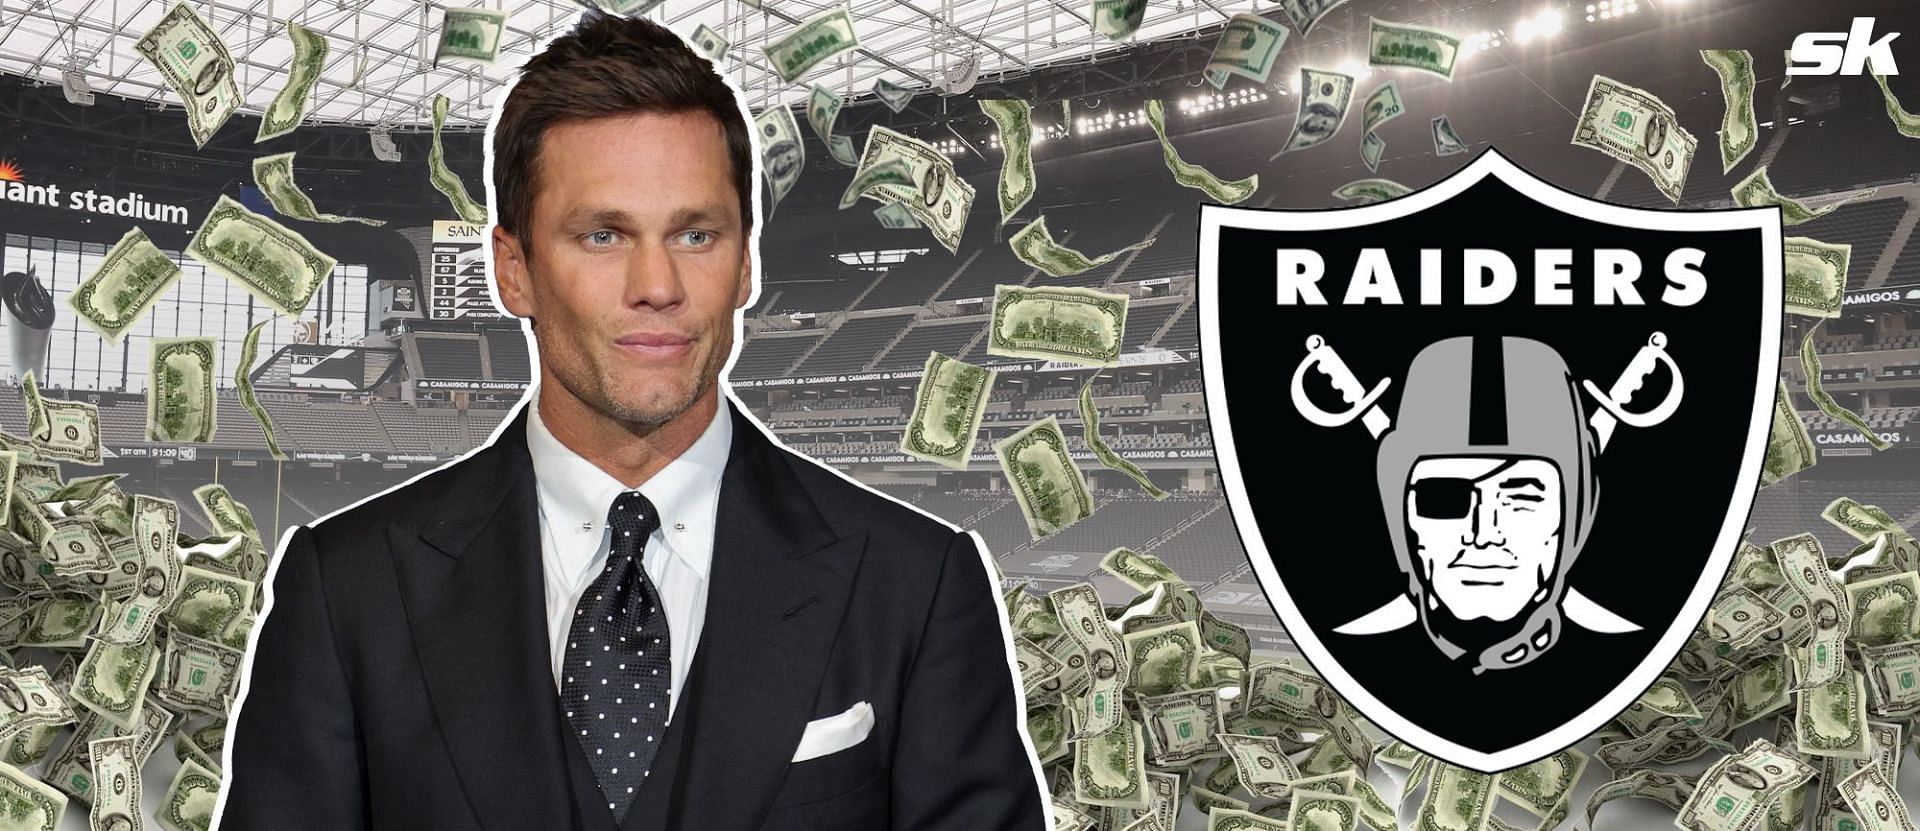 How much of the Raiders is Tom Brady buying? Details emerge of 7x Super Bowl champ&rsquo;s investment in $5,100,000,000 franchise